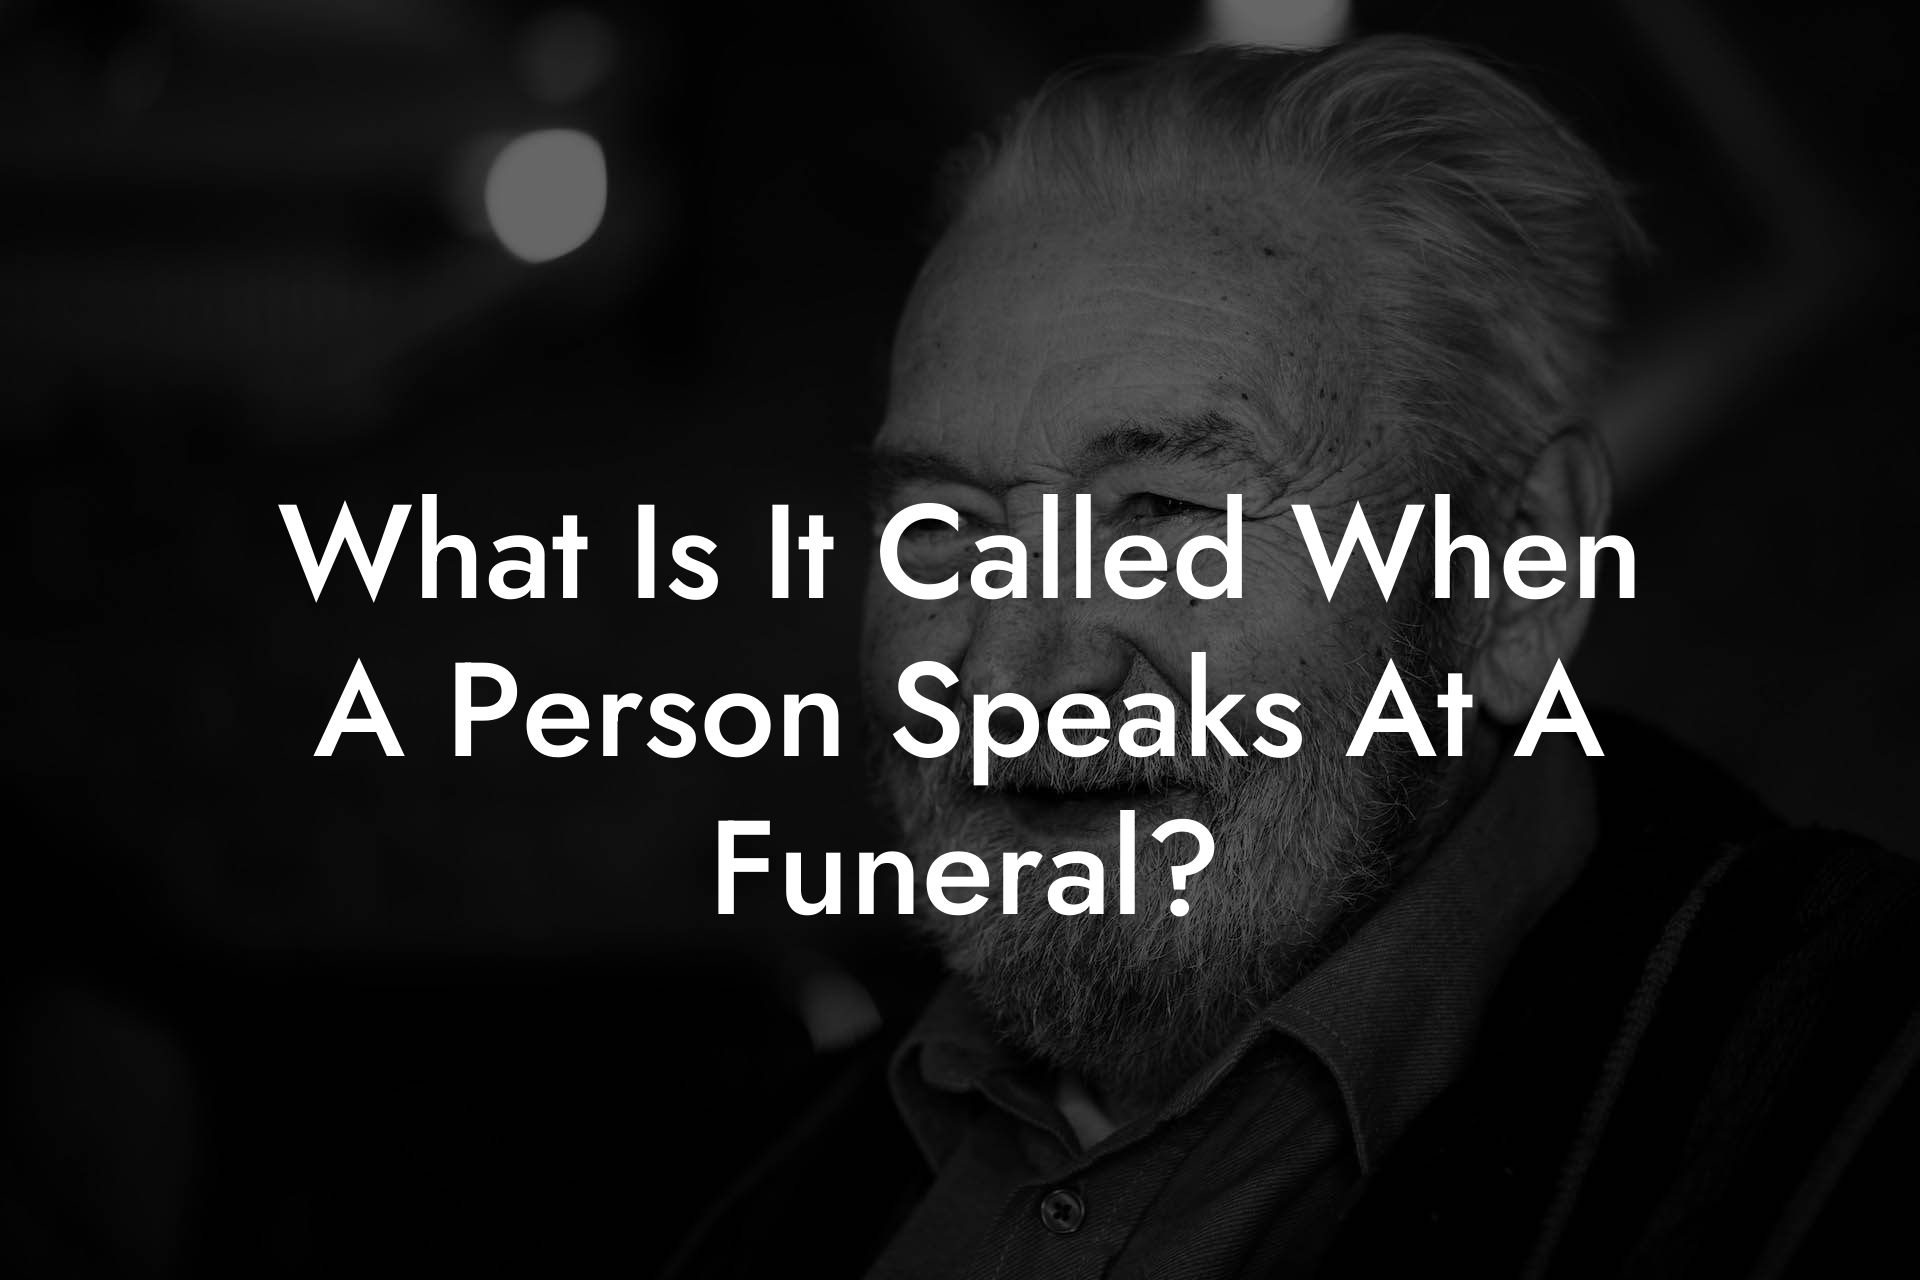 What Is It Called When A Person Speaks At A Funeral?